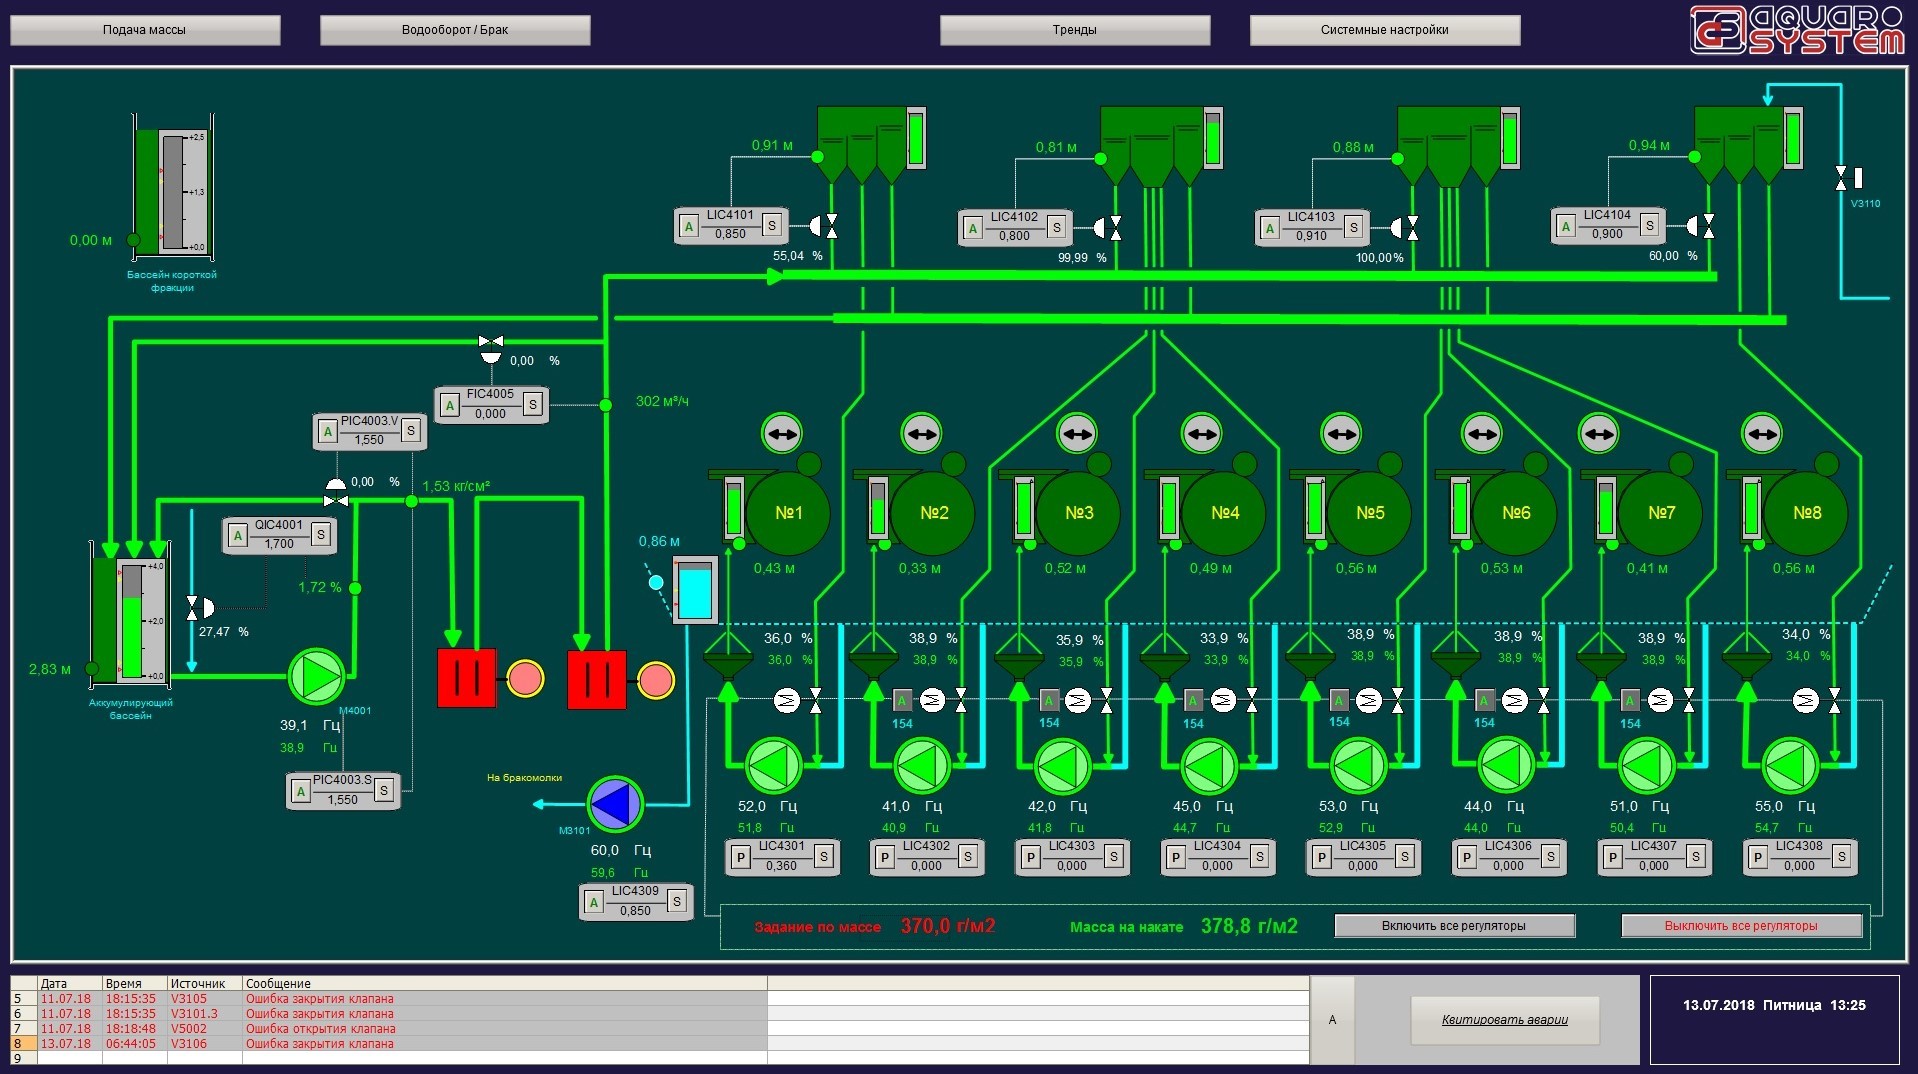 Control system for constant part, headbox control and web profiling